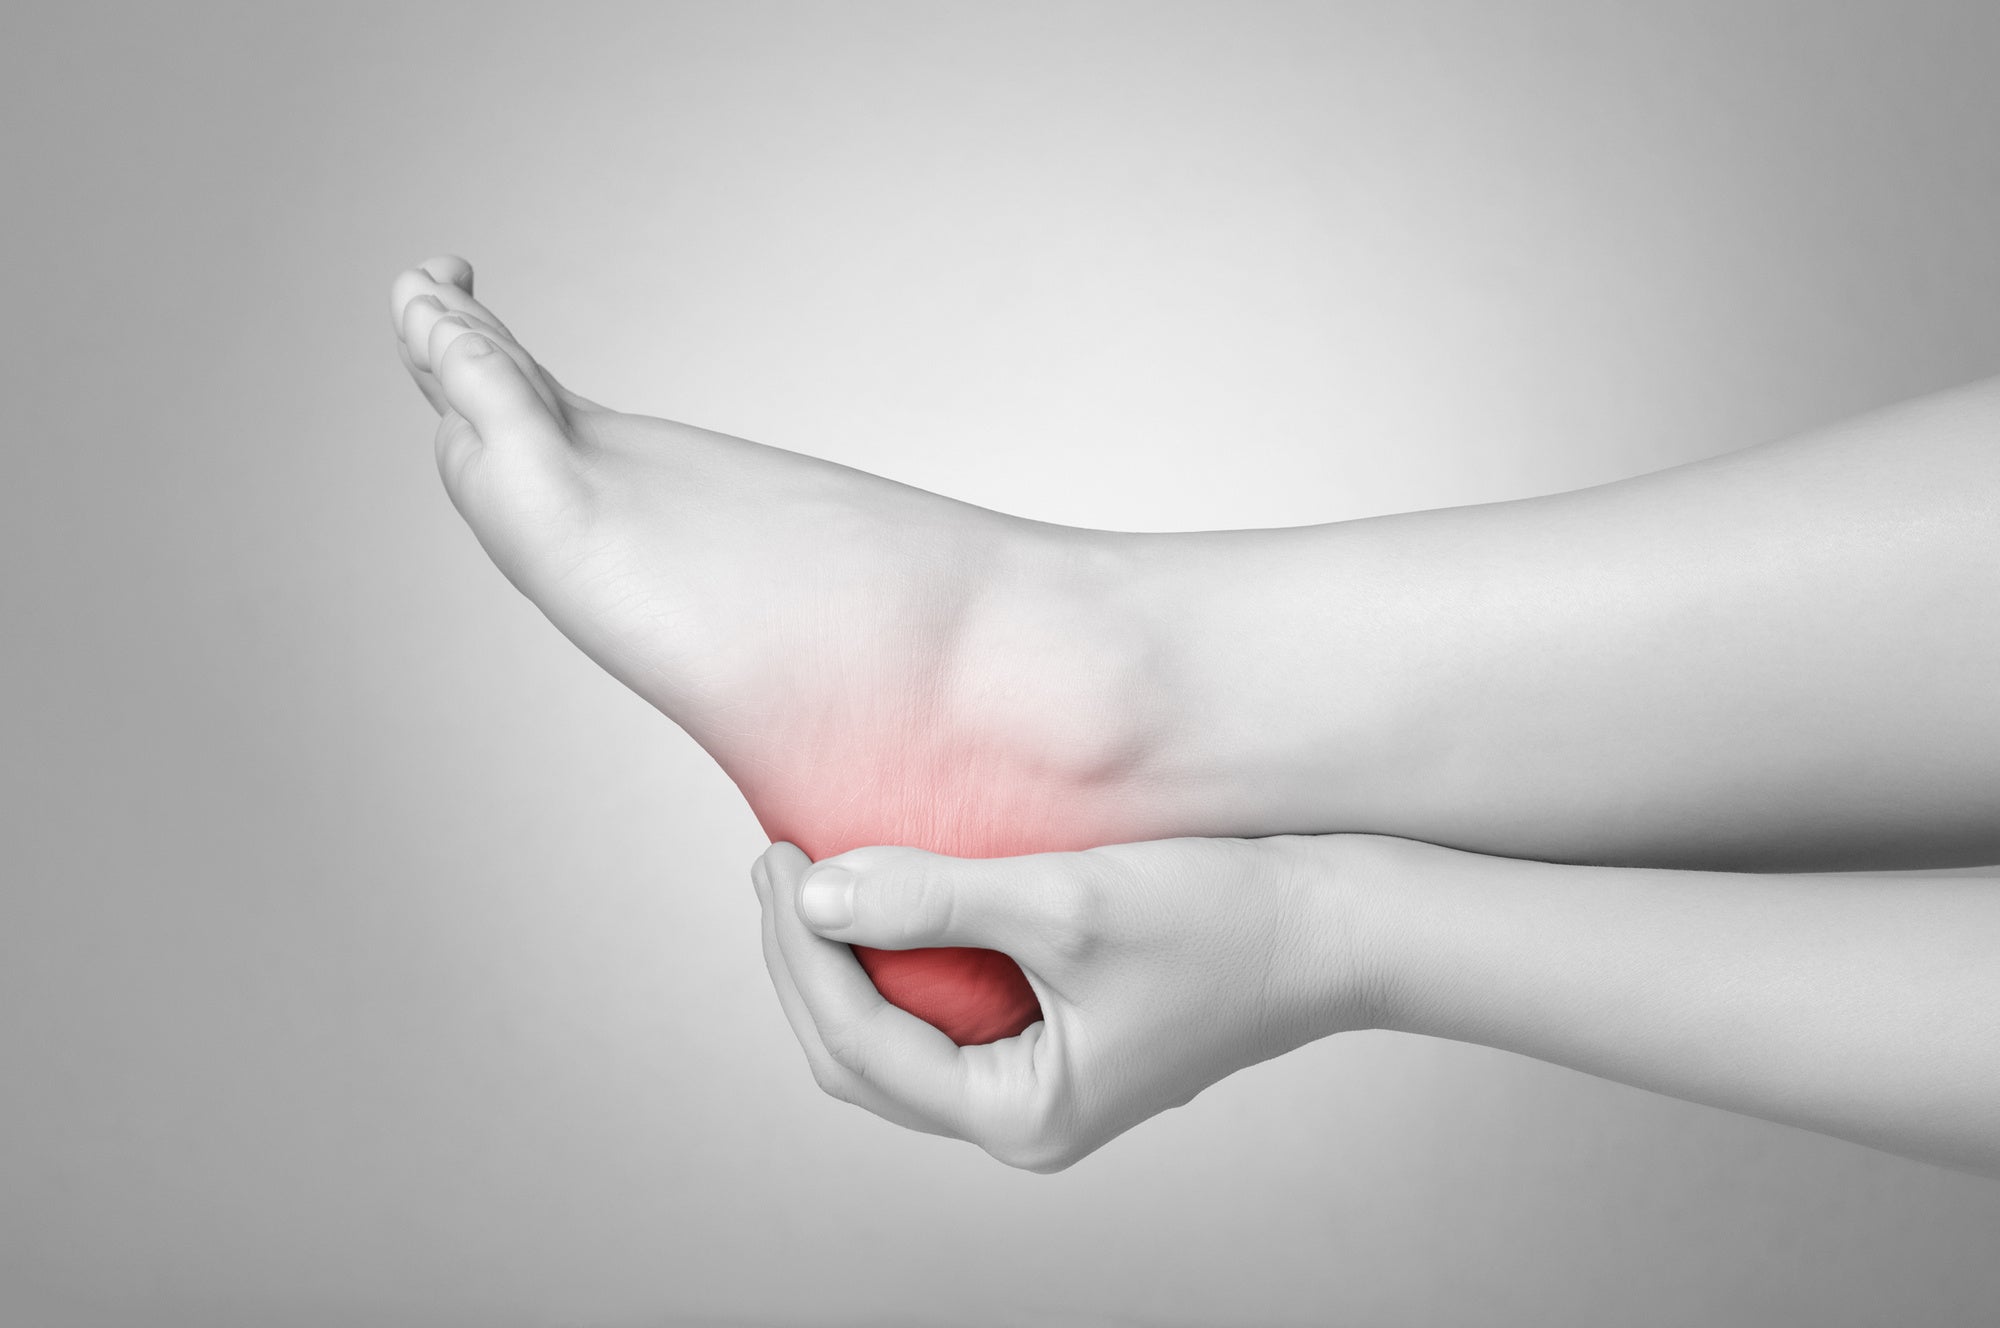 7 Reasons You're Dealing With Heel Pain